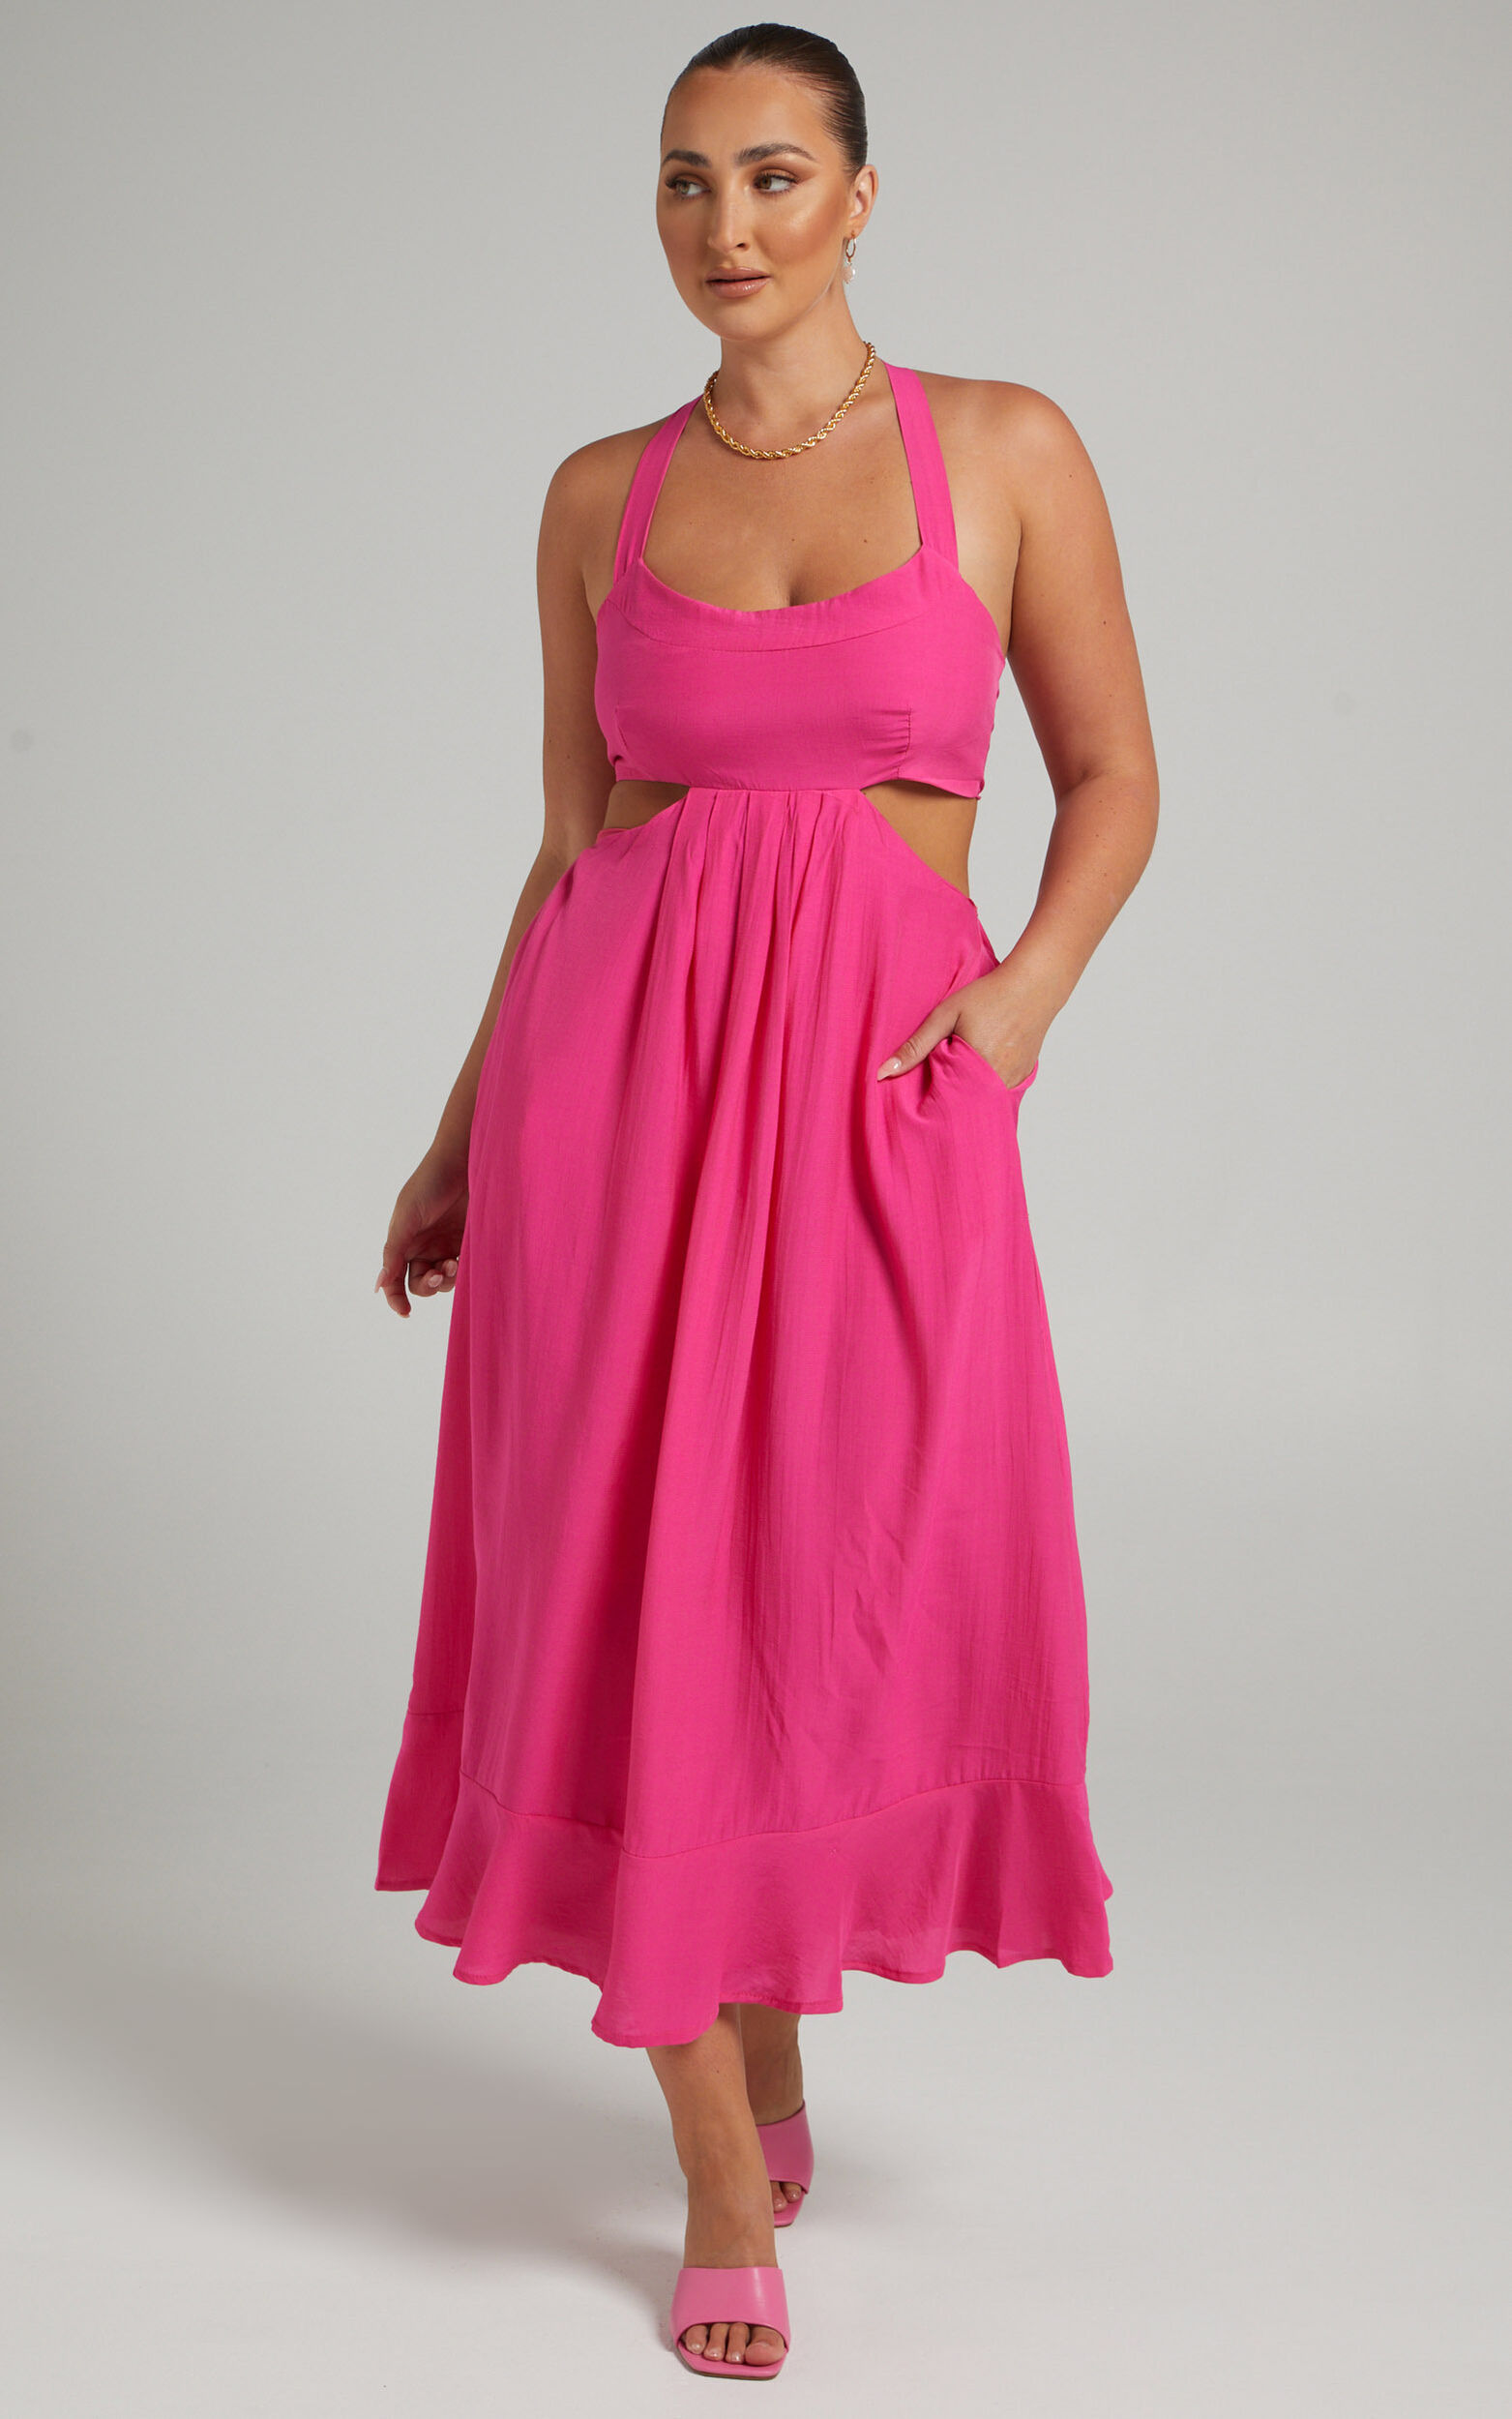 Leontine Midi Dress with Tie Up Back in Hot Pink - 06, PNK2